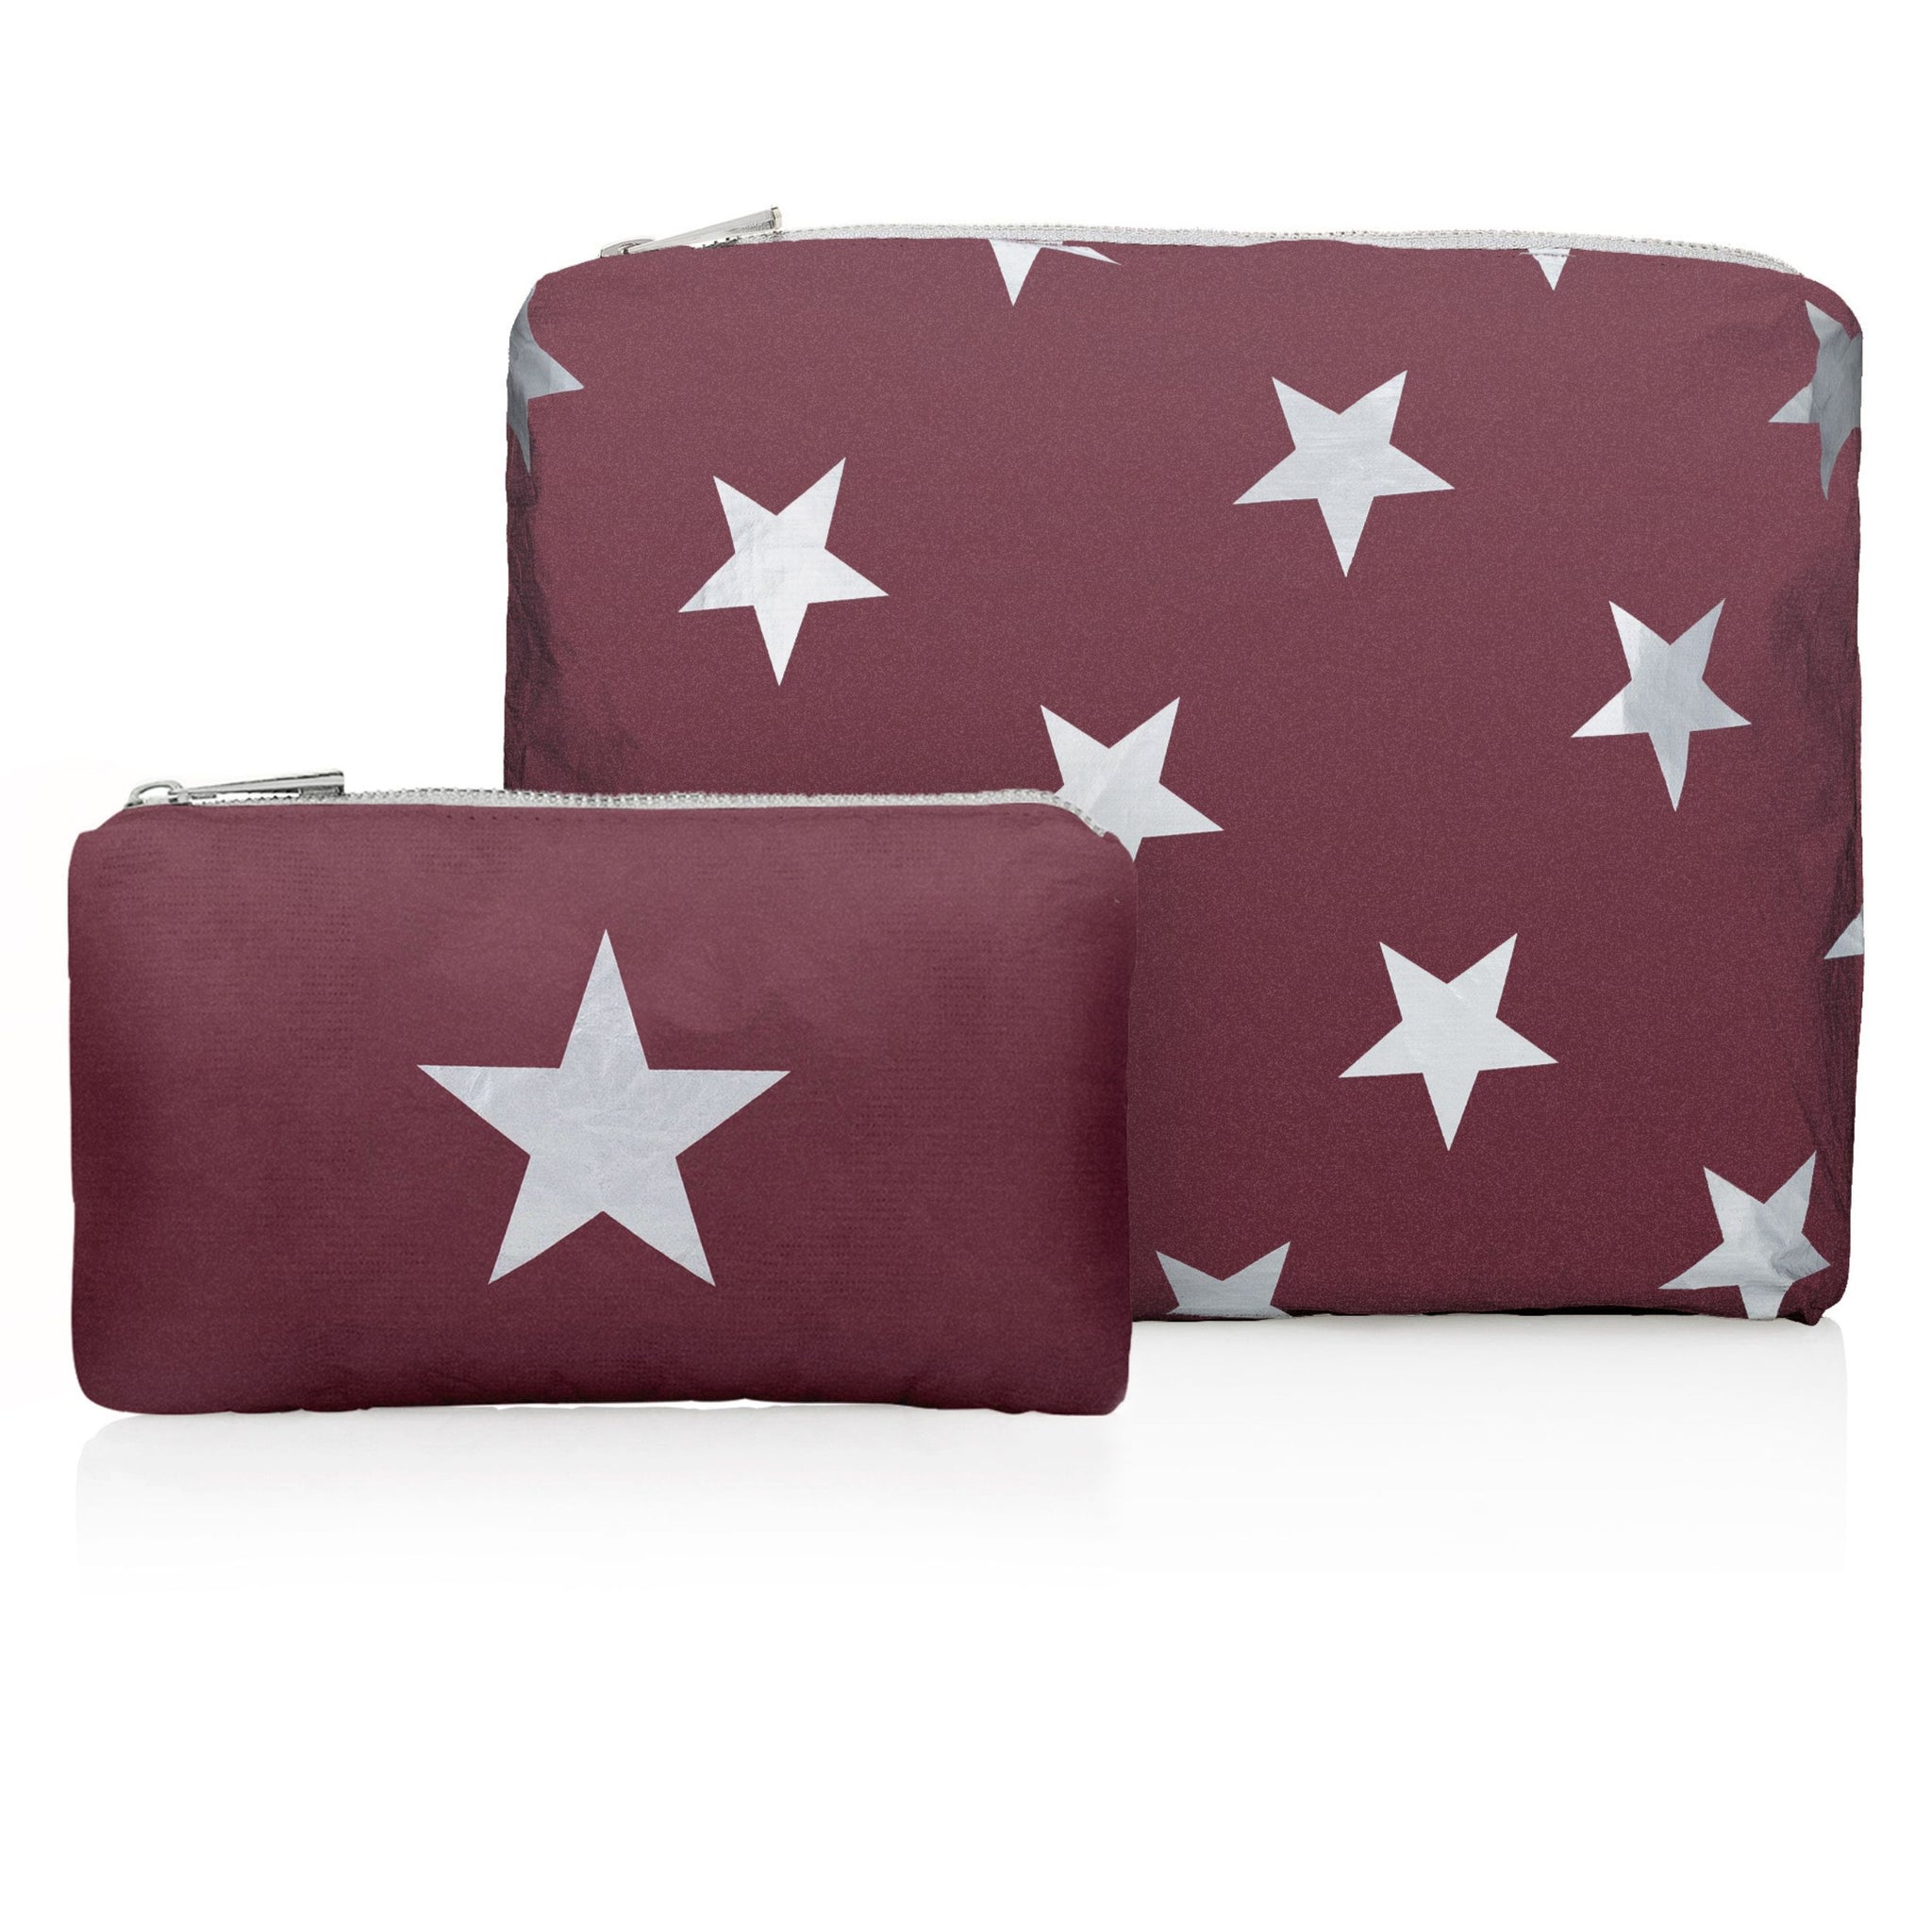 Set of two organizational packs in shimmer cabernet with metallic silver stars